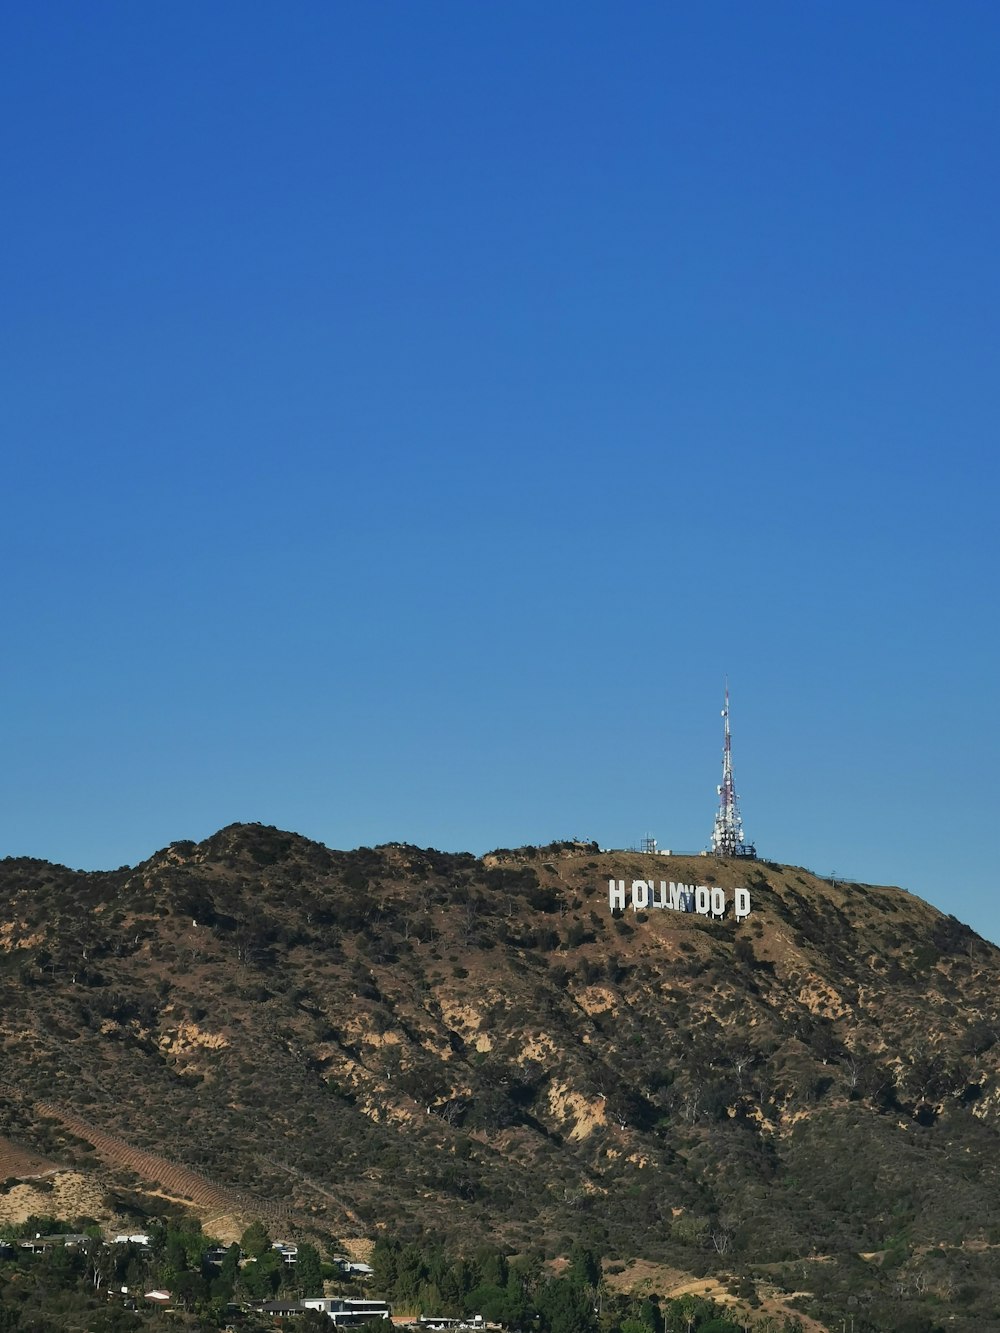 white tower on brown rock mountain under blue sky during daytime